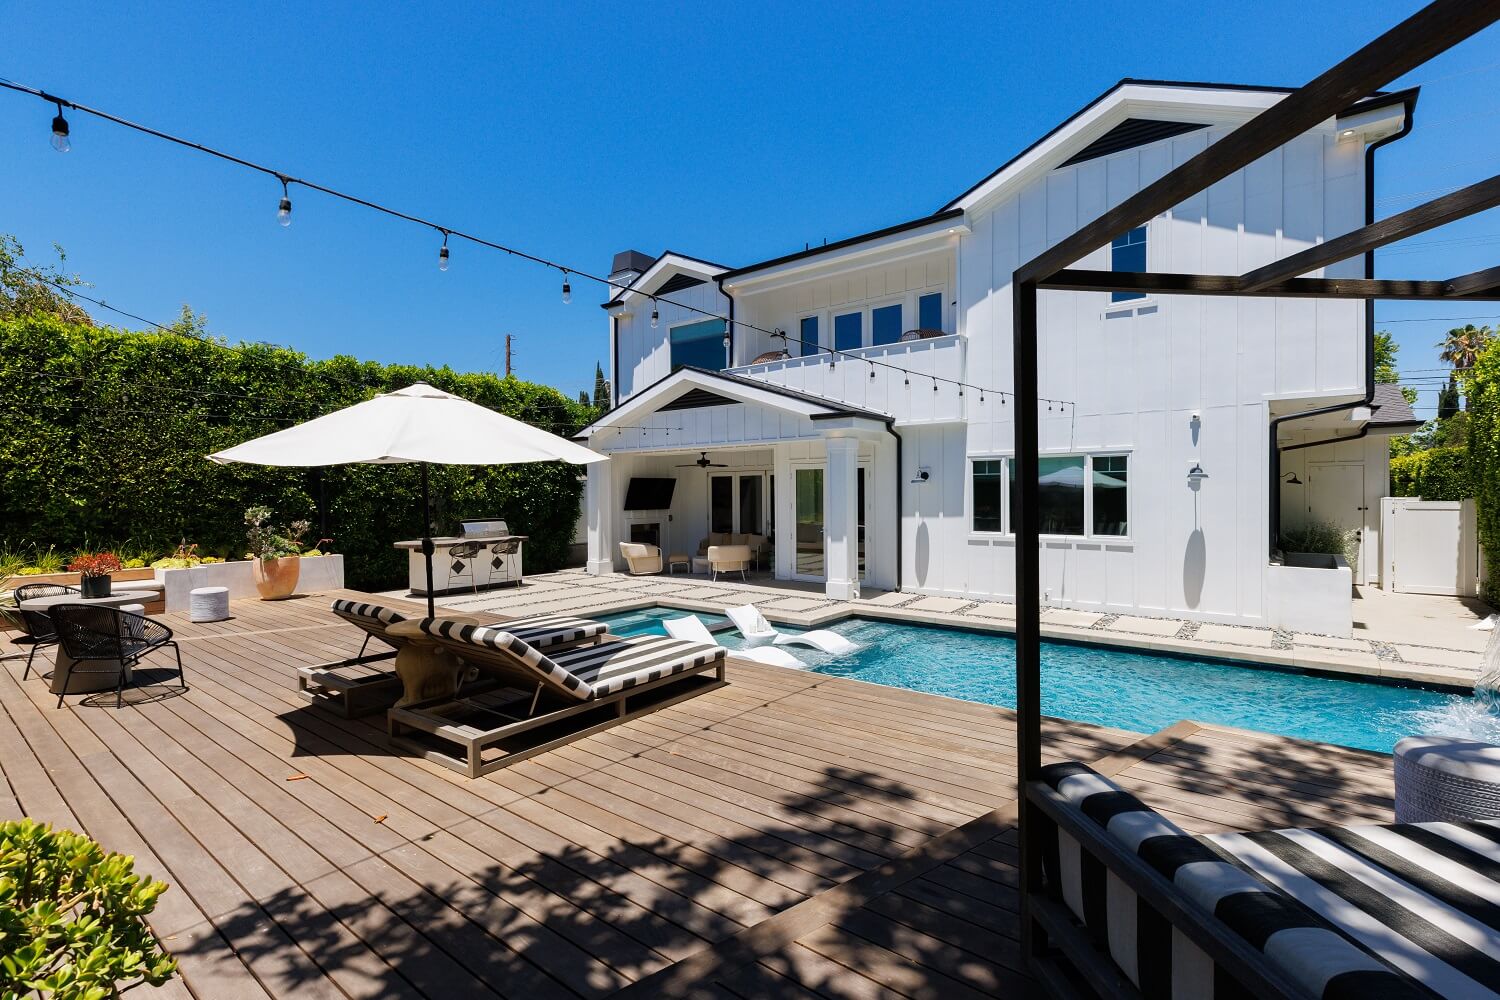 modern-white-home-los-angeles-garden-swimming-pool-daveed-diggs-emmy-raver-lampman-nordroom